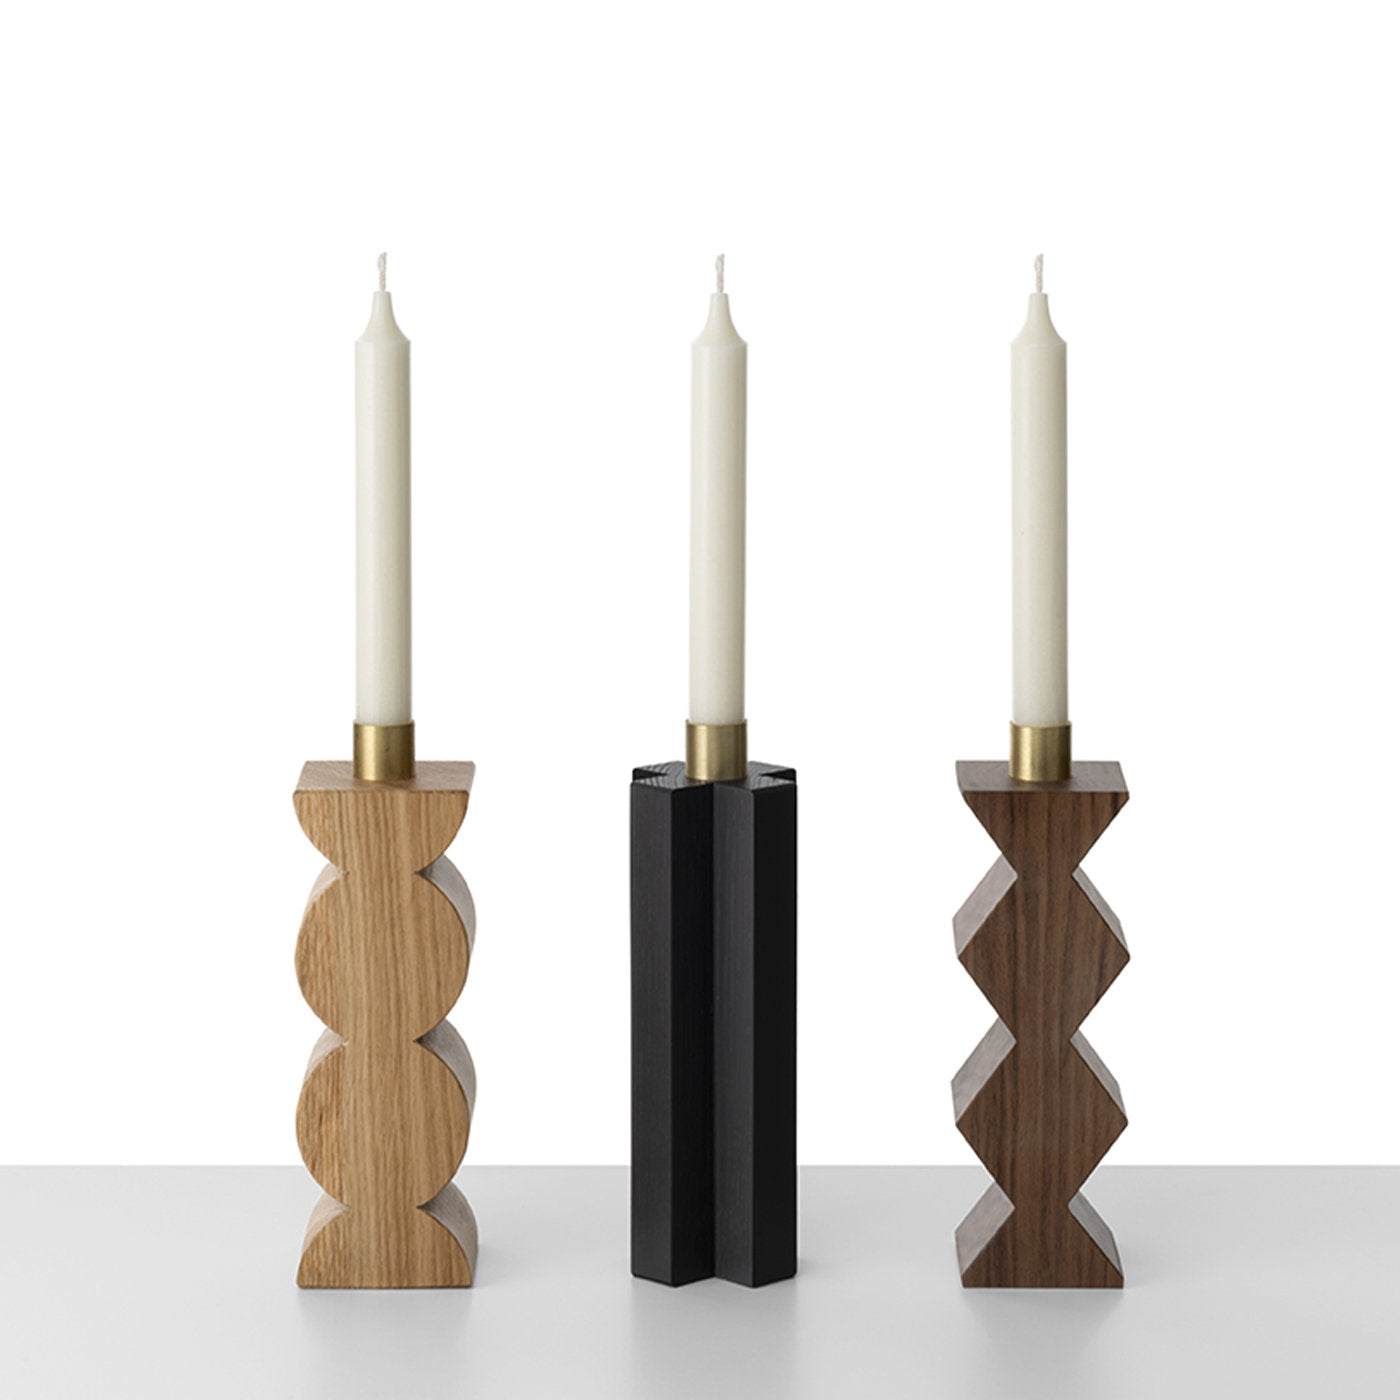 Constantin Cross Candle Holder by Agustina Bottoni - Alternative view 1